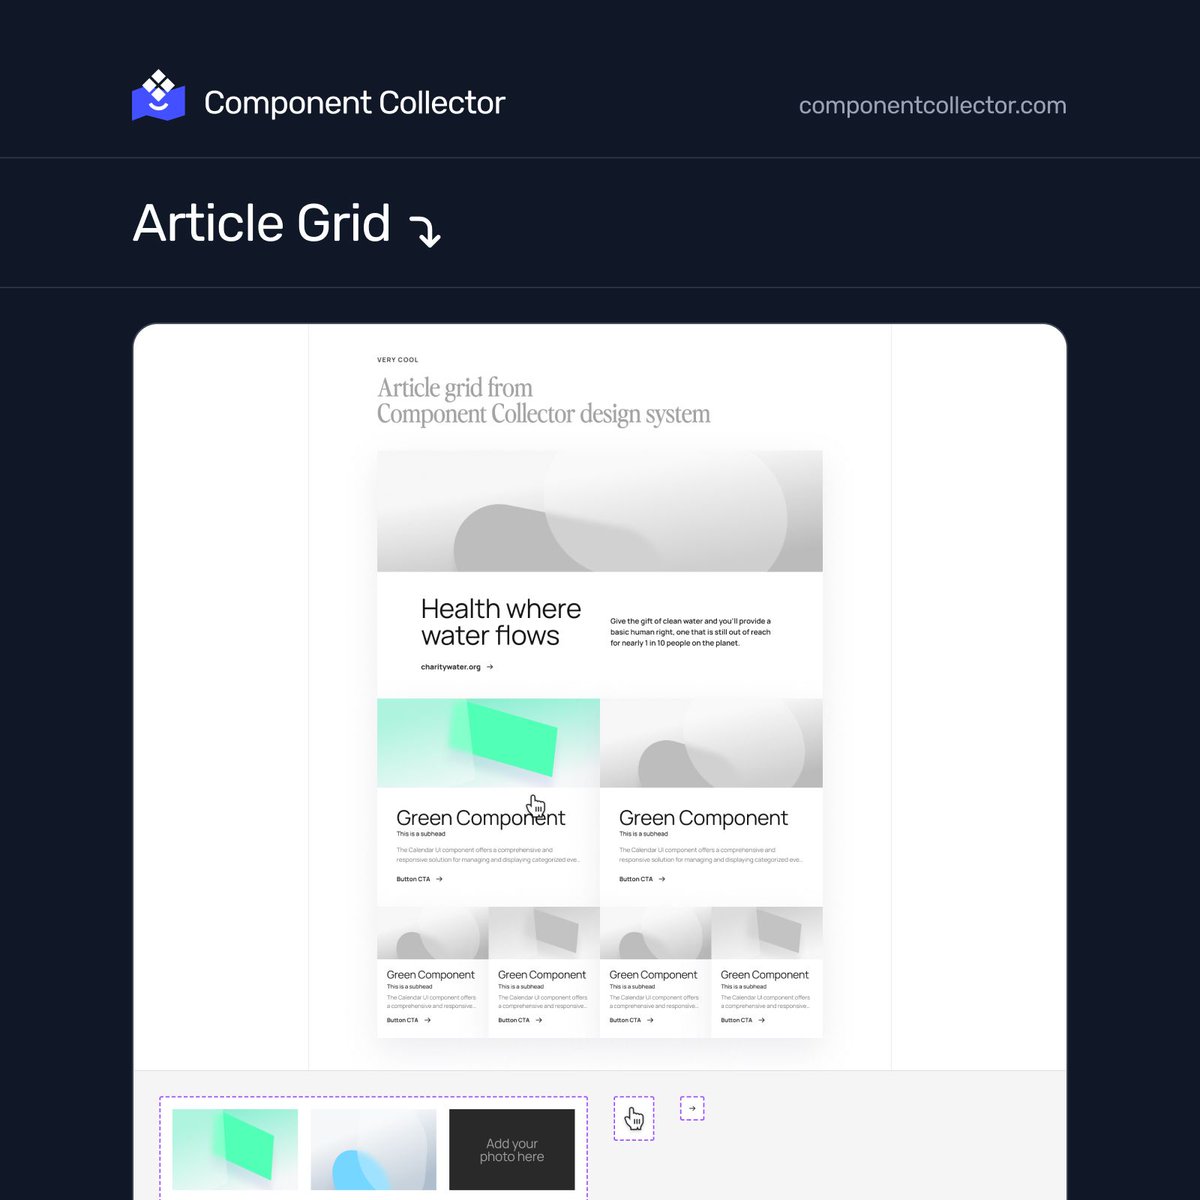 New Figma component! 🥦  Find it on Component Collector.
#figma #ui #uiux #component #designsystem #uidesign #componentcollector #buildinpublic #odw